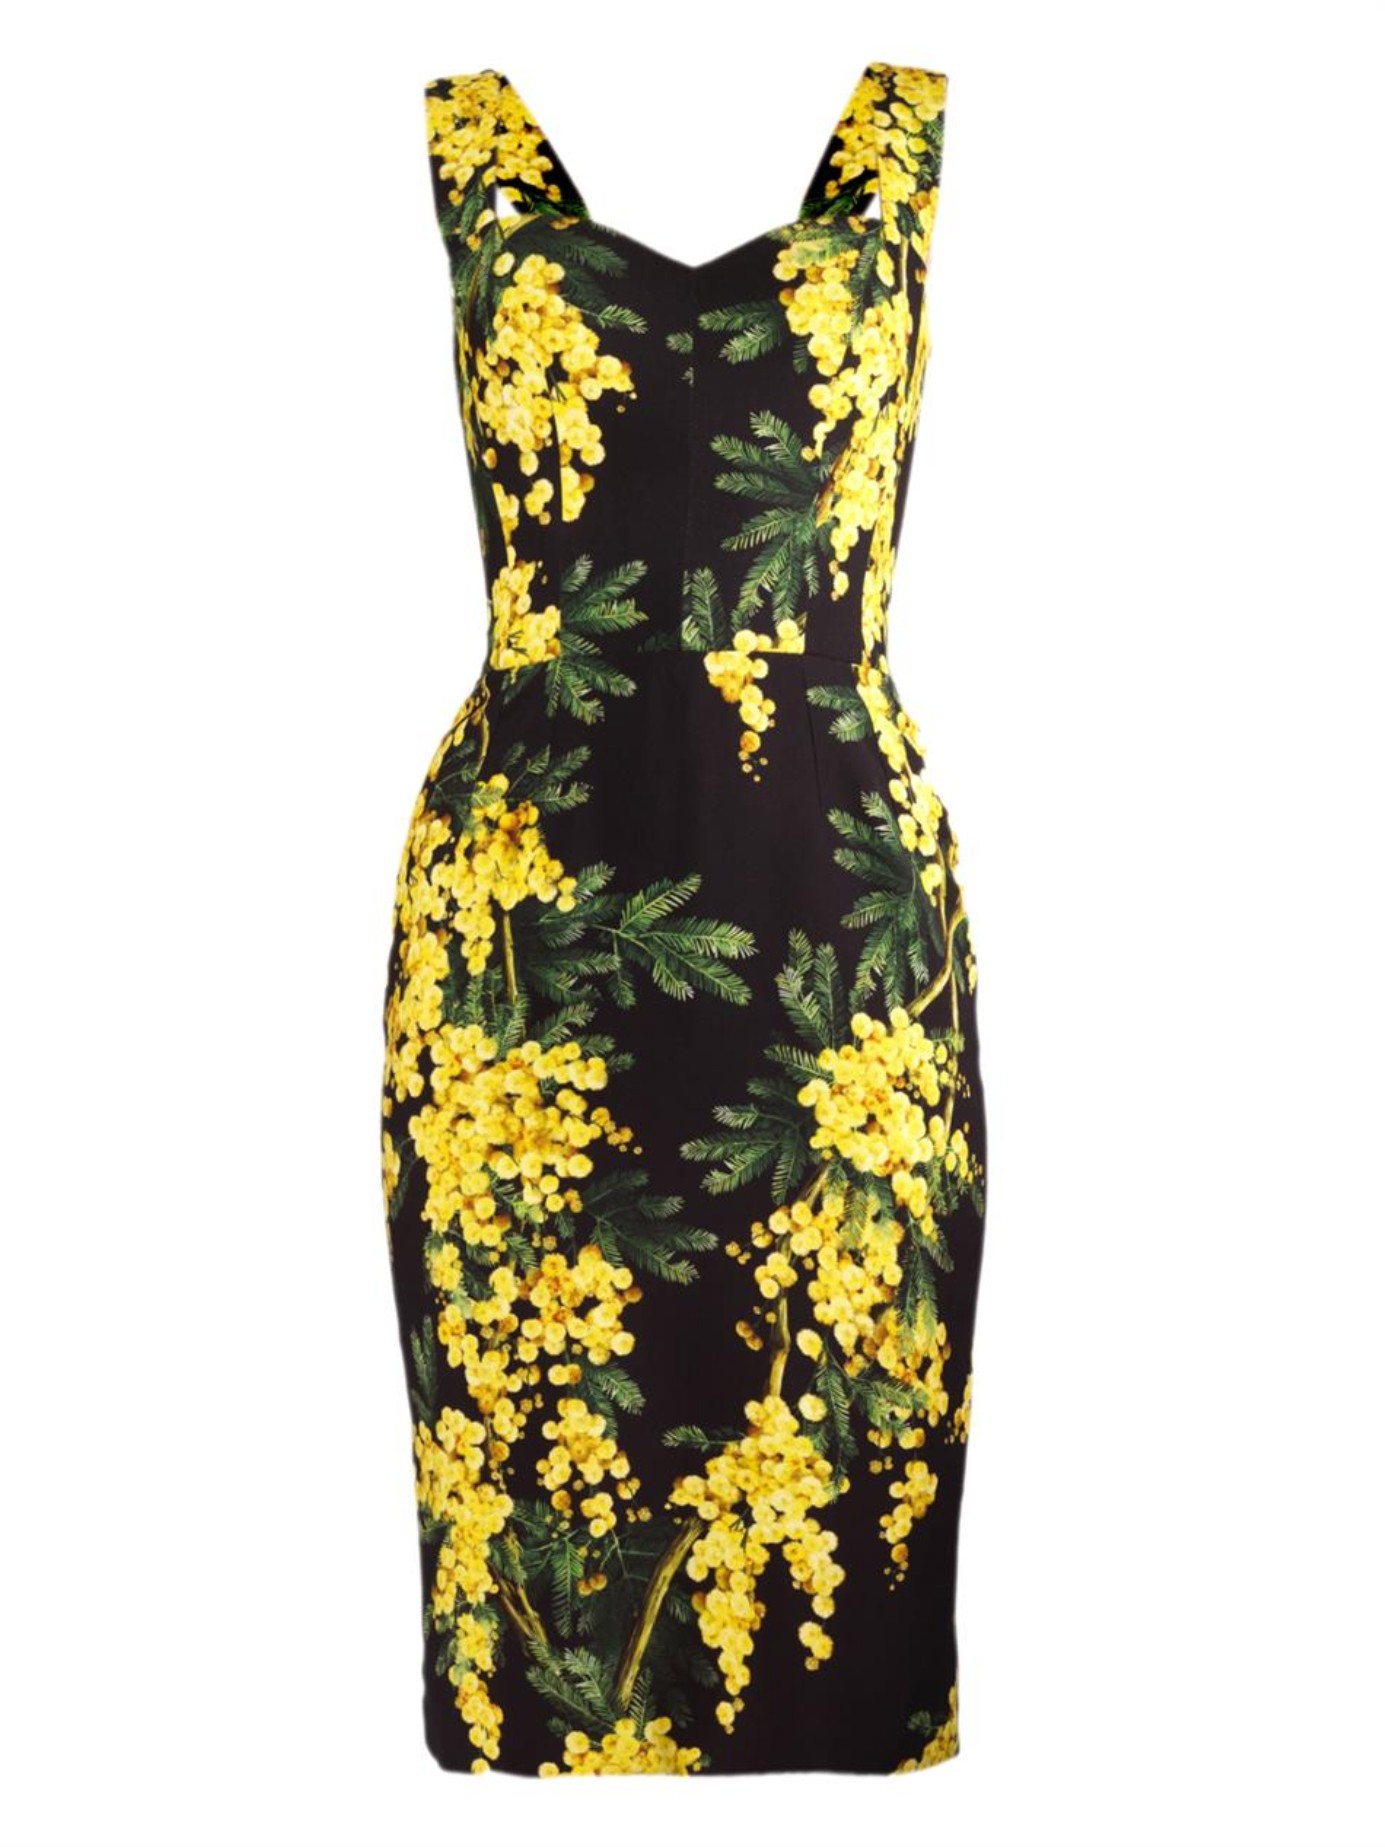 2 Tracee Ellis Ross's TCA Press Tour Dolce & Gabbana Black and Yellow  Floral Dress